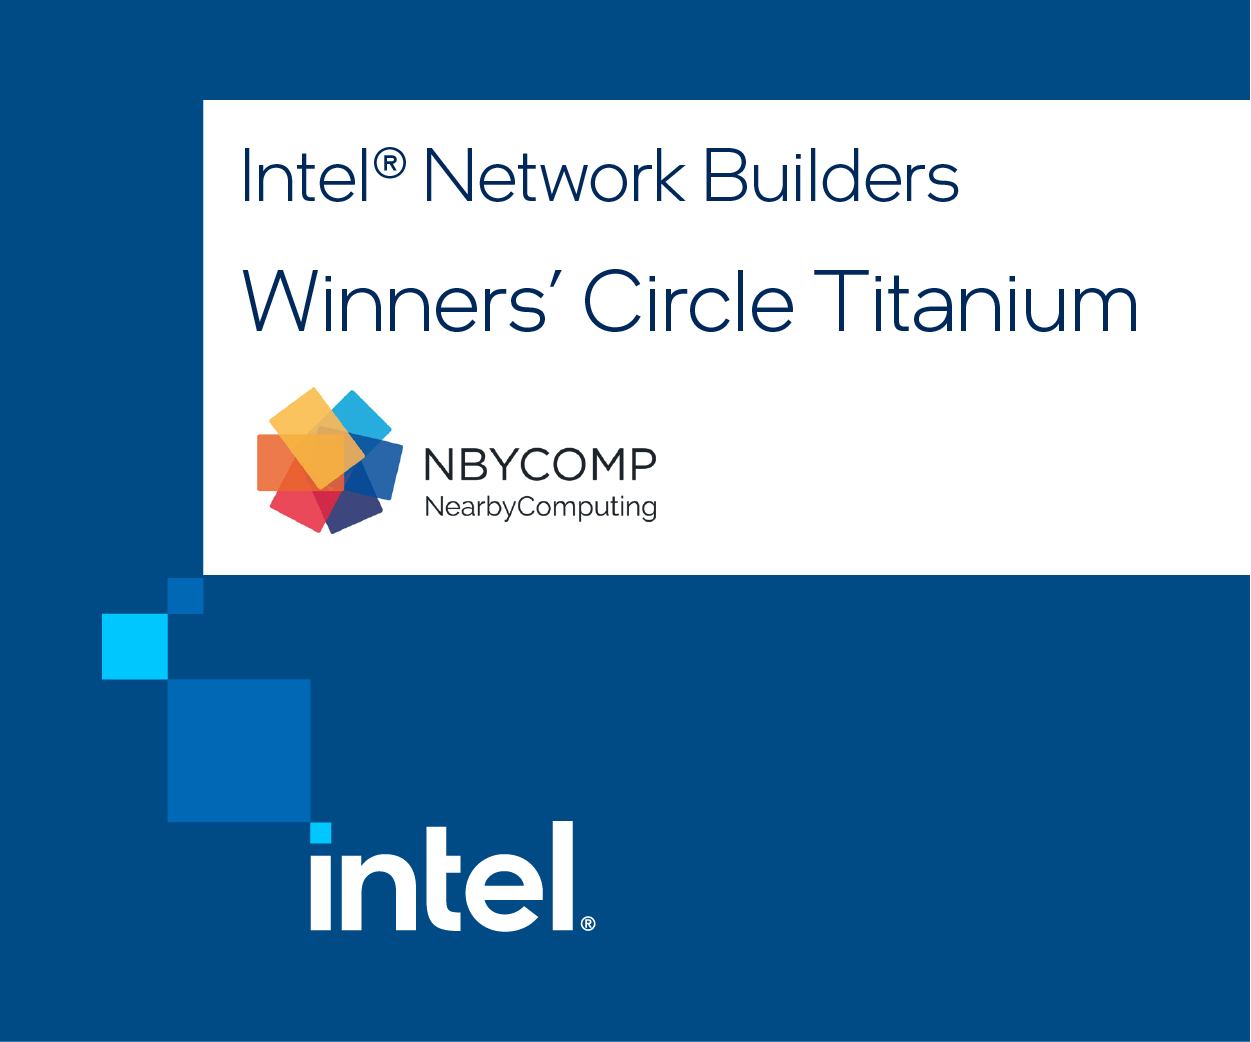 Intel Network Builders awards Titanium Level recognition to the edge computing startup Nearby Computing